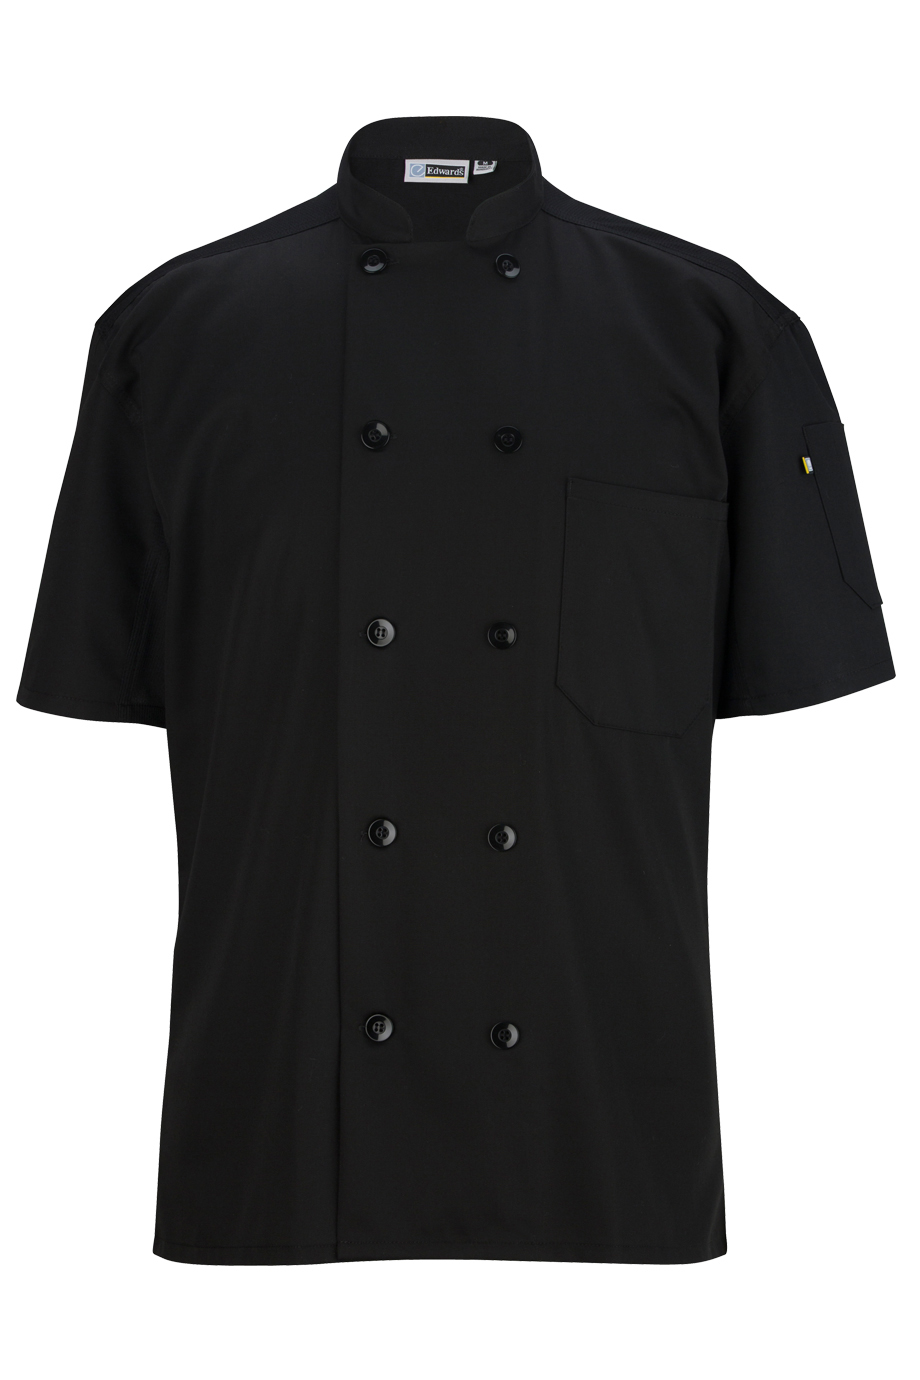 MESH BACK CHEF COAT - 10-BUTTONS